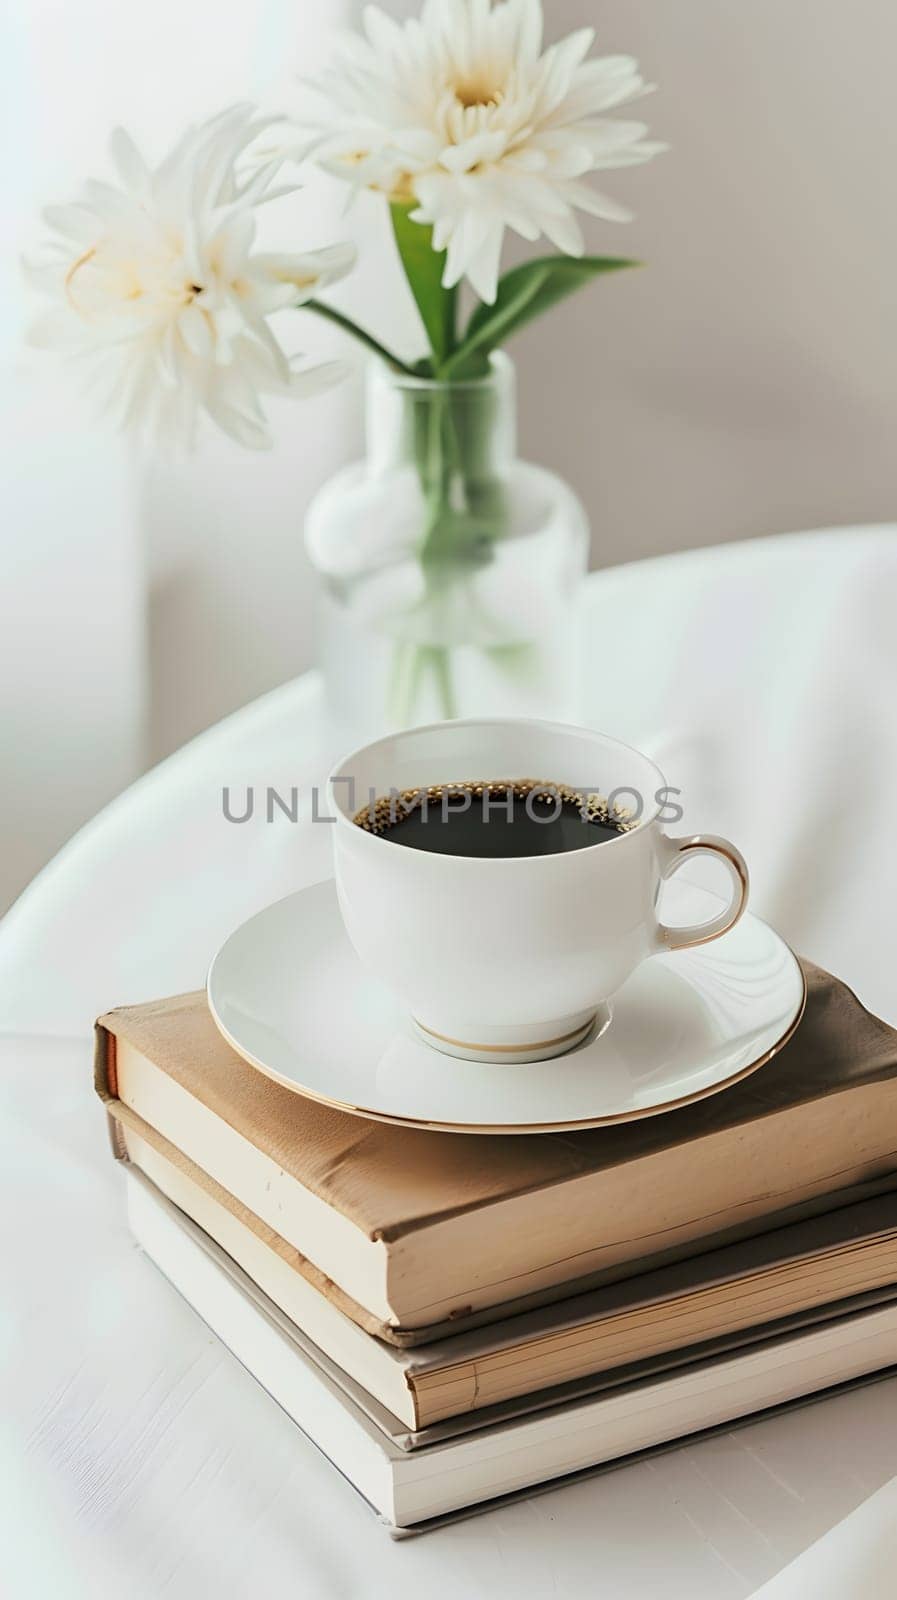 A flower is next to a cup of coffee on a stack of books, displayed on the table. The drinkware is surrounded by plant serveware and porcelain teacups